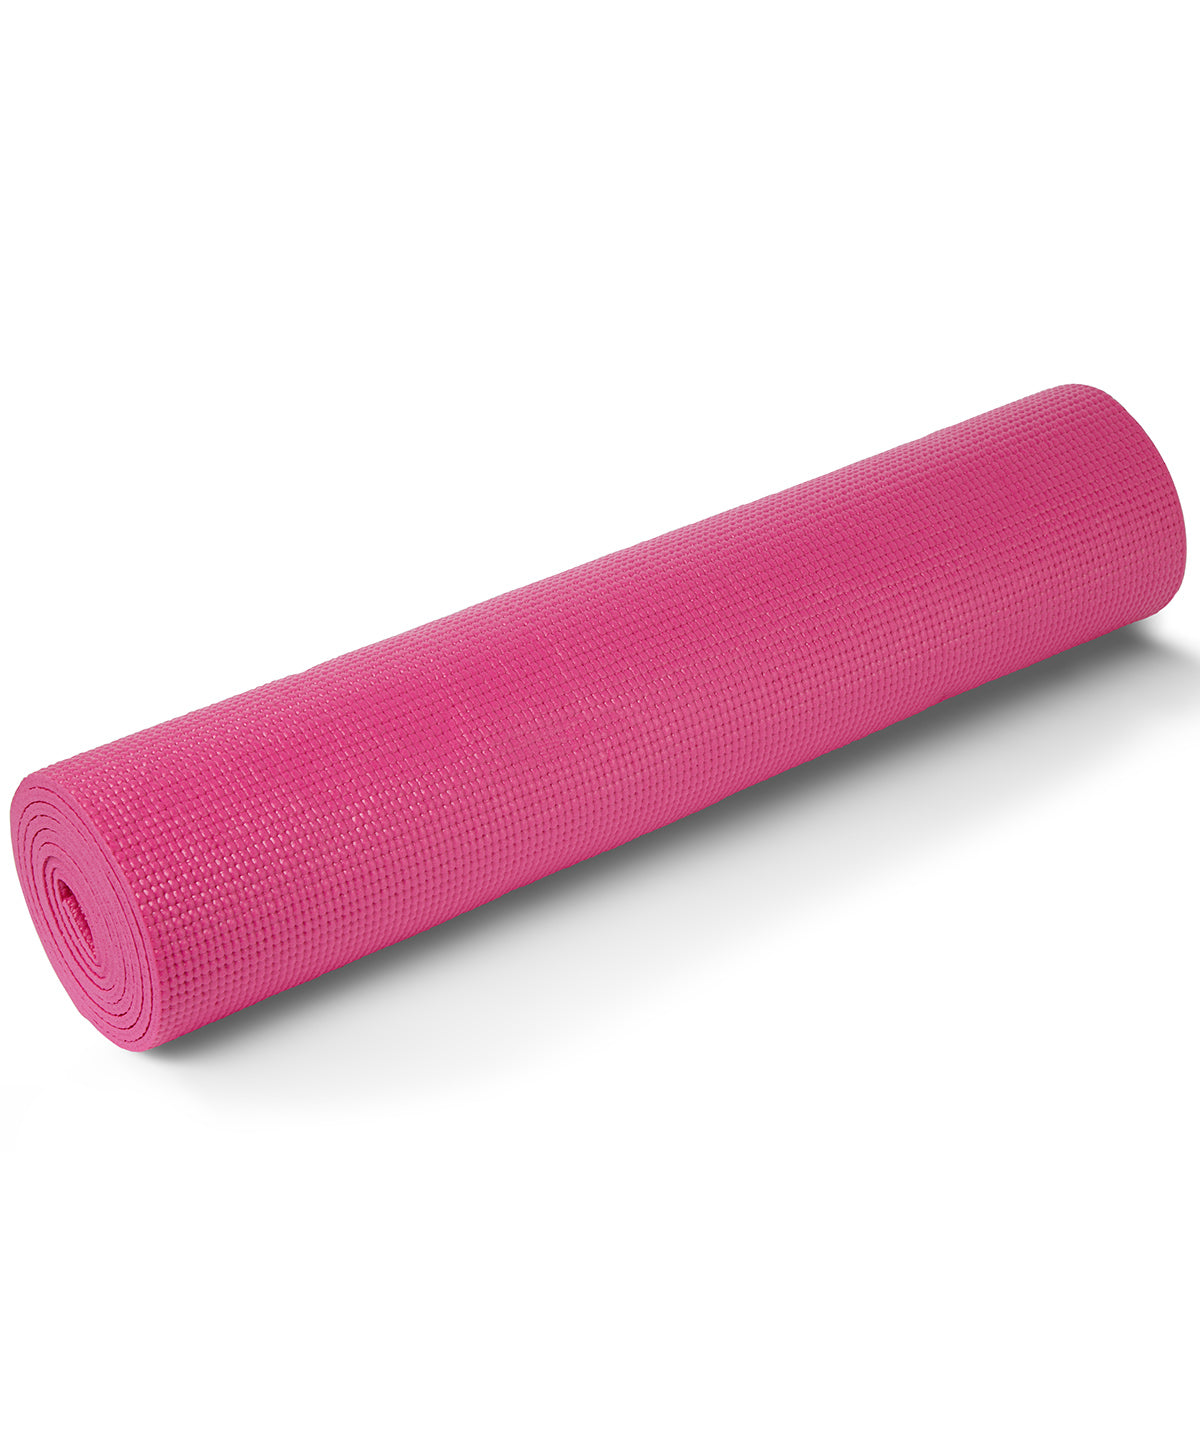 Hot Pink - TriDri® Yoga and fitness mat Yoga Mats TriDri® Activewear & Performance, Exclusives, Gifting & Accessories, Rebrandable, Sports & Leisure Schoolwear Centres